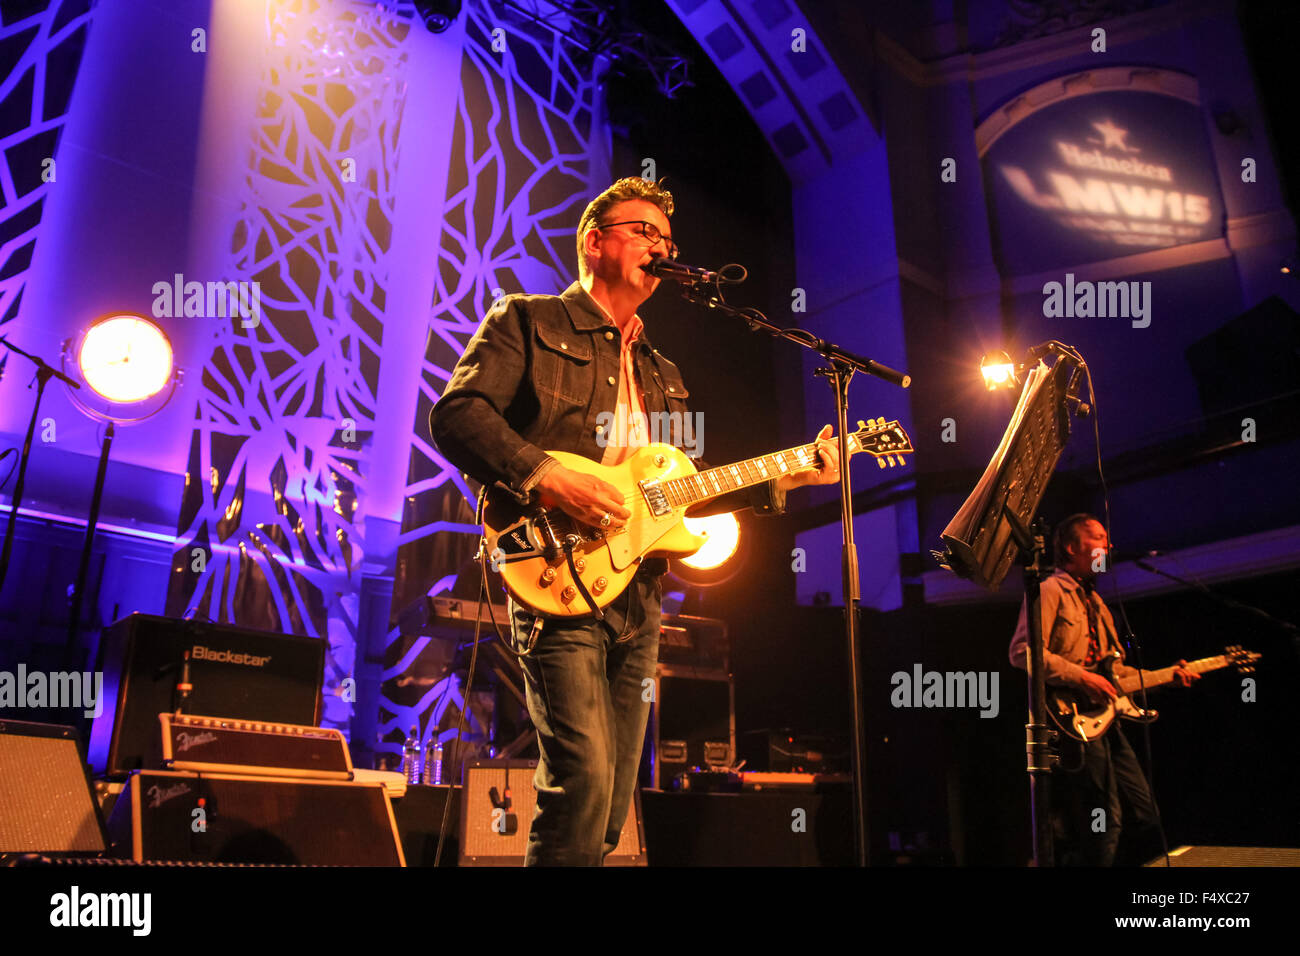 Liverpool, UK. 23rd October, 2015. Richard Hawley performs live at The Dome, Grand Central Hall during Liverpool Music Week. Credit:  Simon Newbury/Alamy Live News Stock Photo